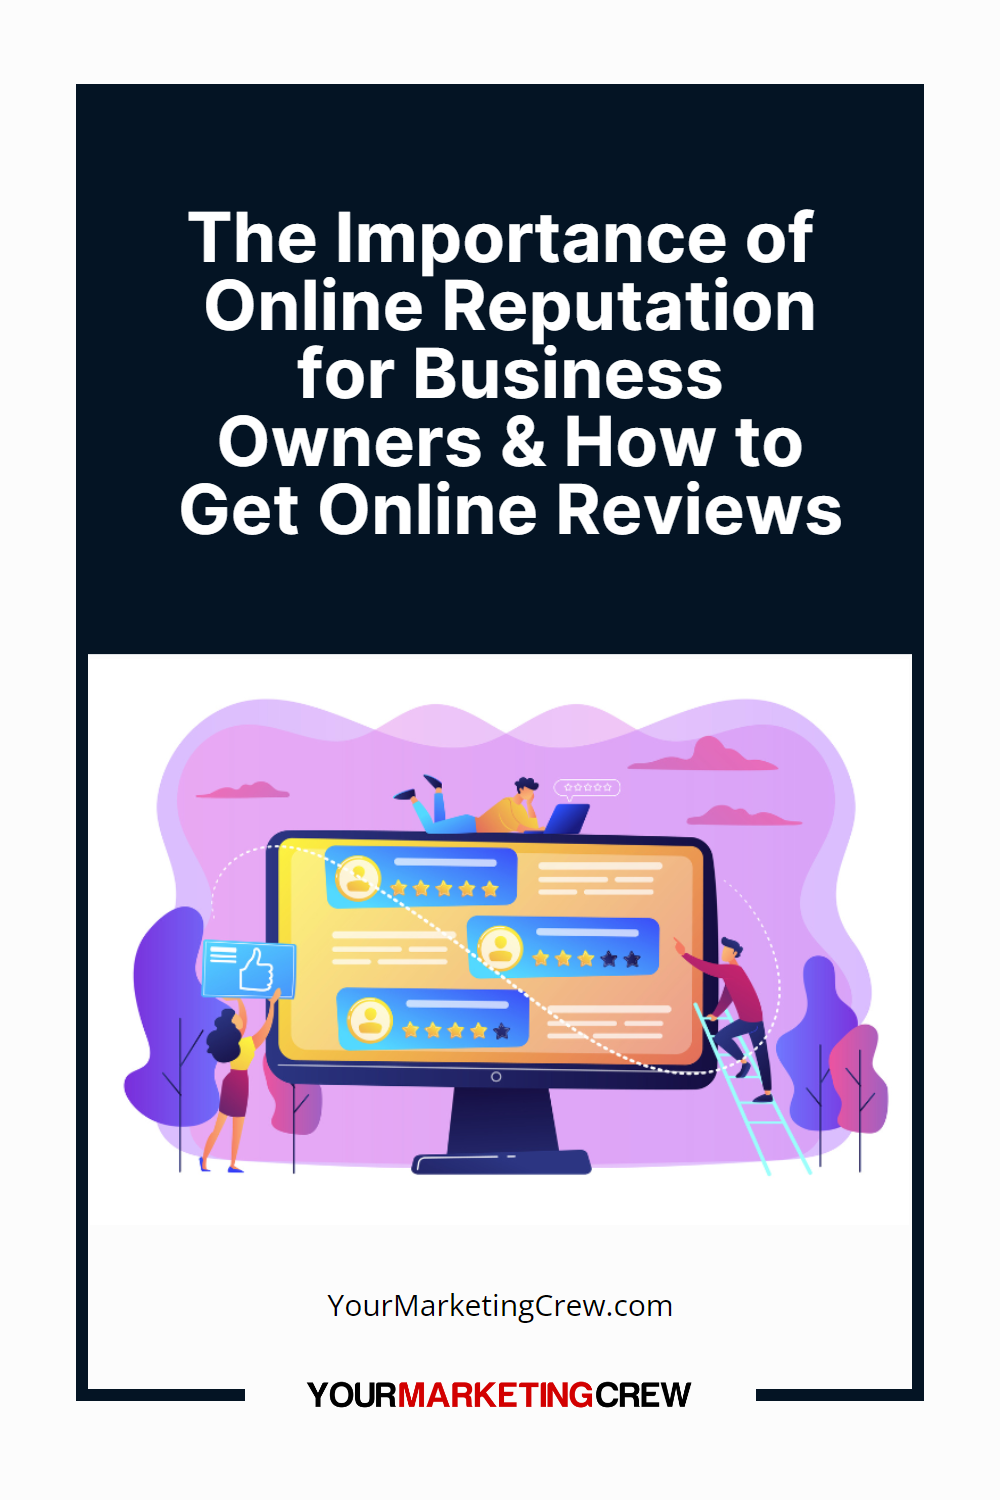 The Importance of Online Reputation for Business Owners & How to Get Reviews